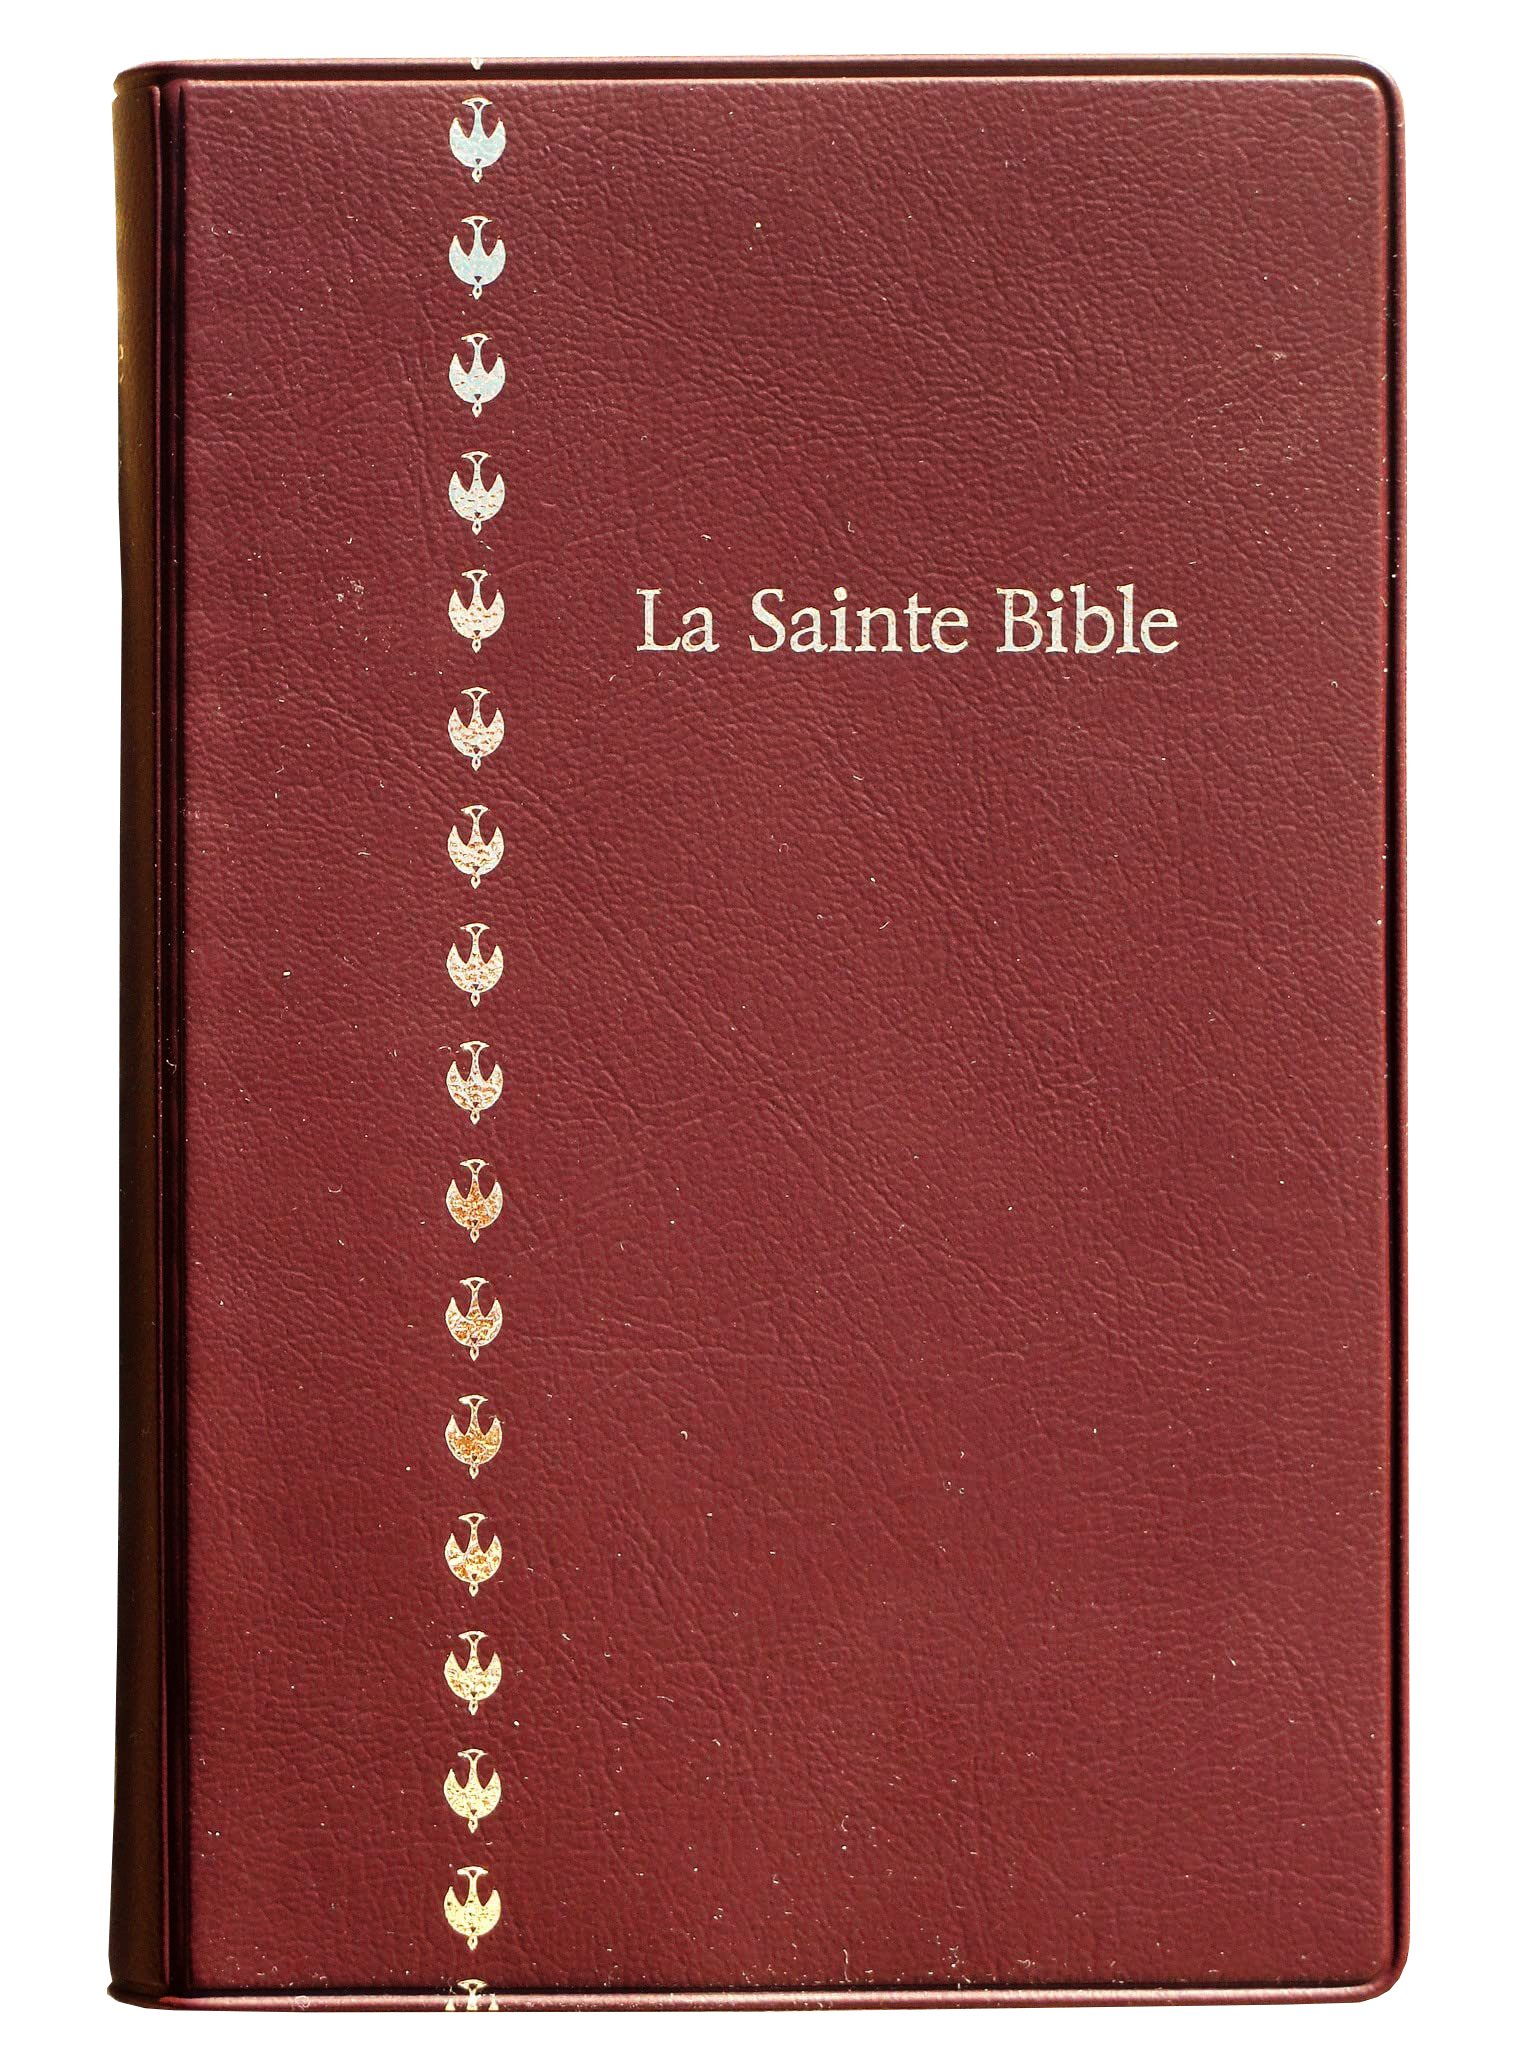 The Holy Bible Dove - Bible Segond 1978